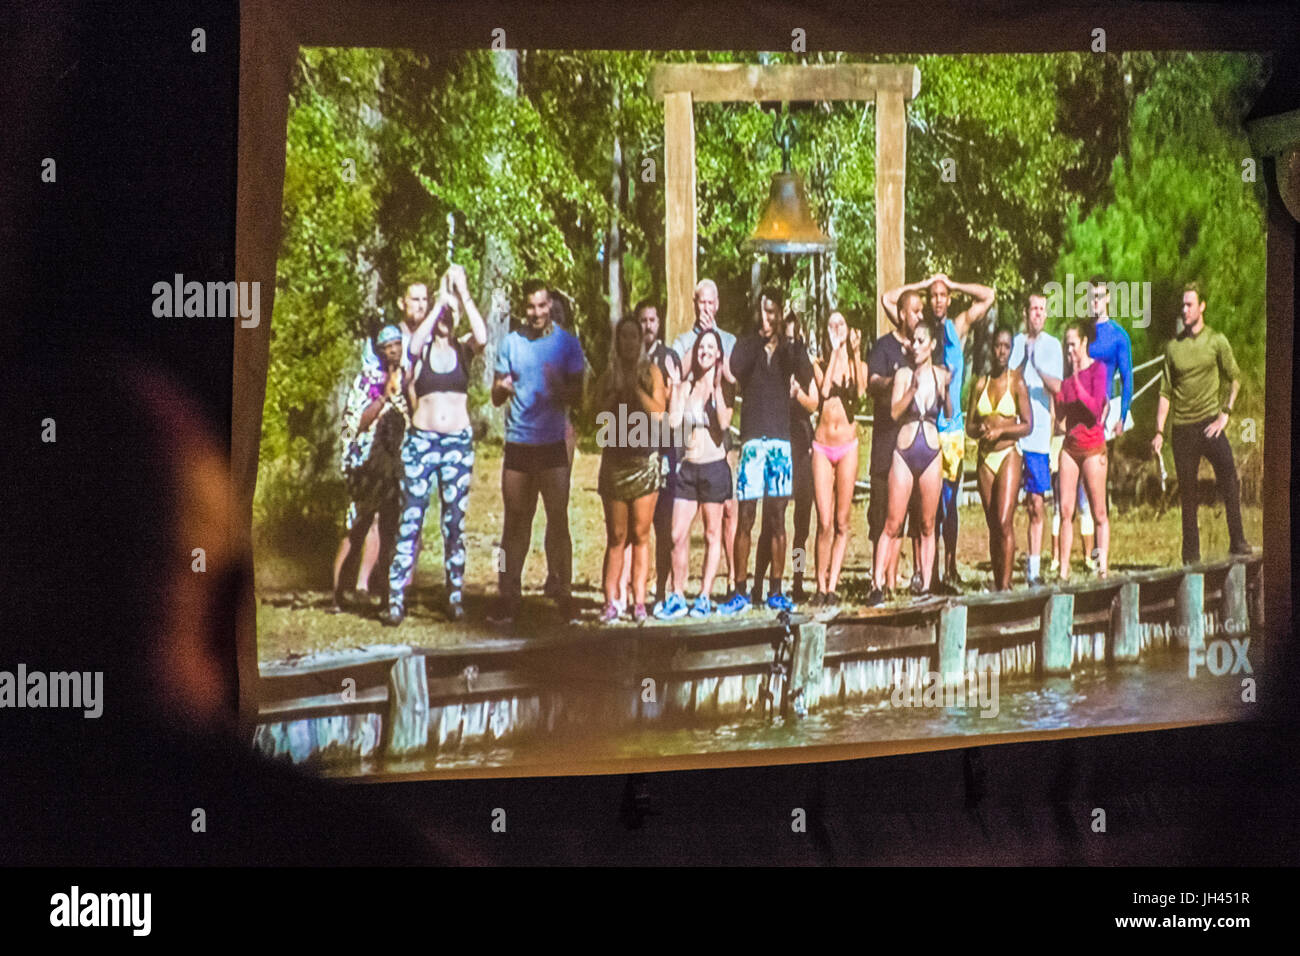 Merrick, New York, USA. 11th June 2017.  During 'American Grit' Season 2 premiere, (4th from right in blue swim trunks) CHRIS EDOM, 48, of Merrick, is Stock Photo